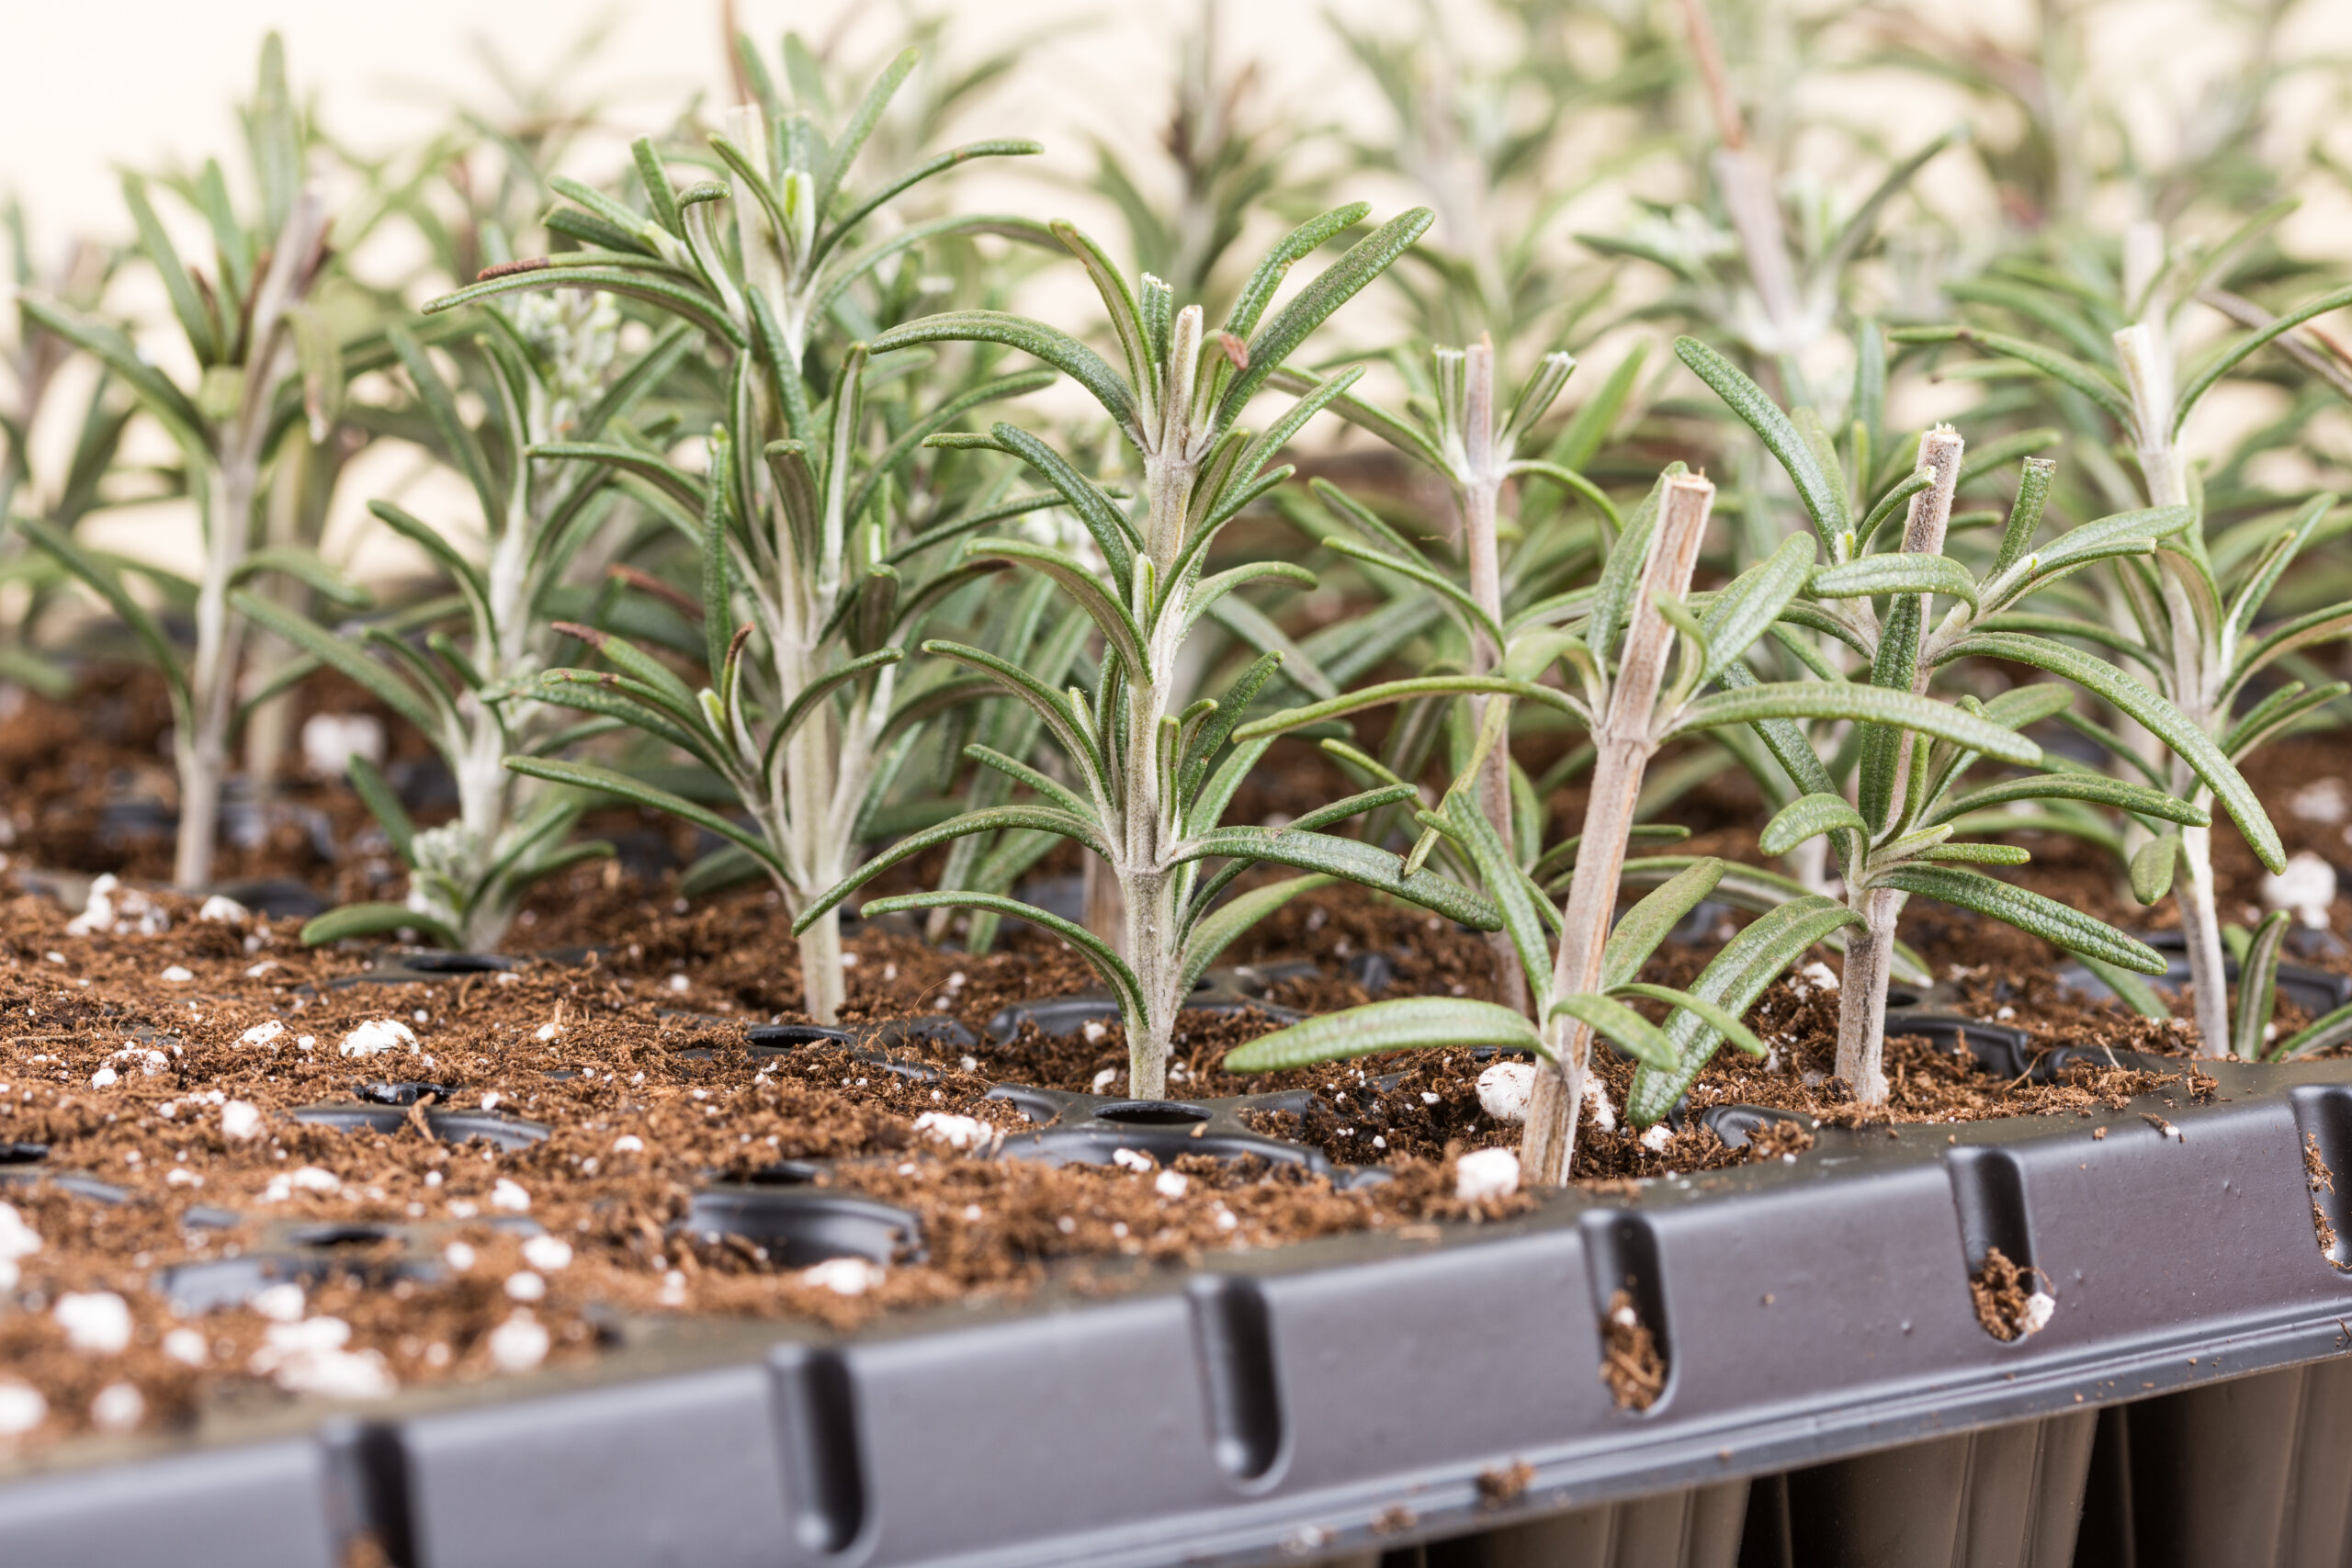 Propagating rosemary from softwood cuttings